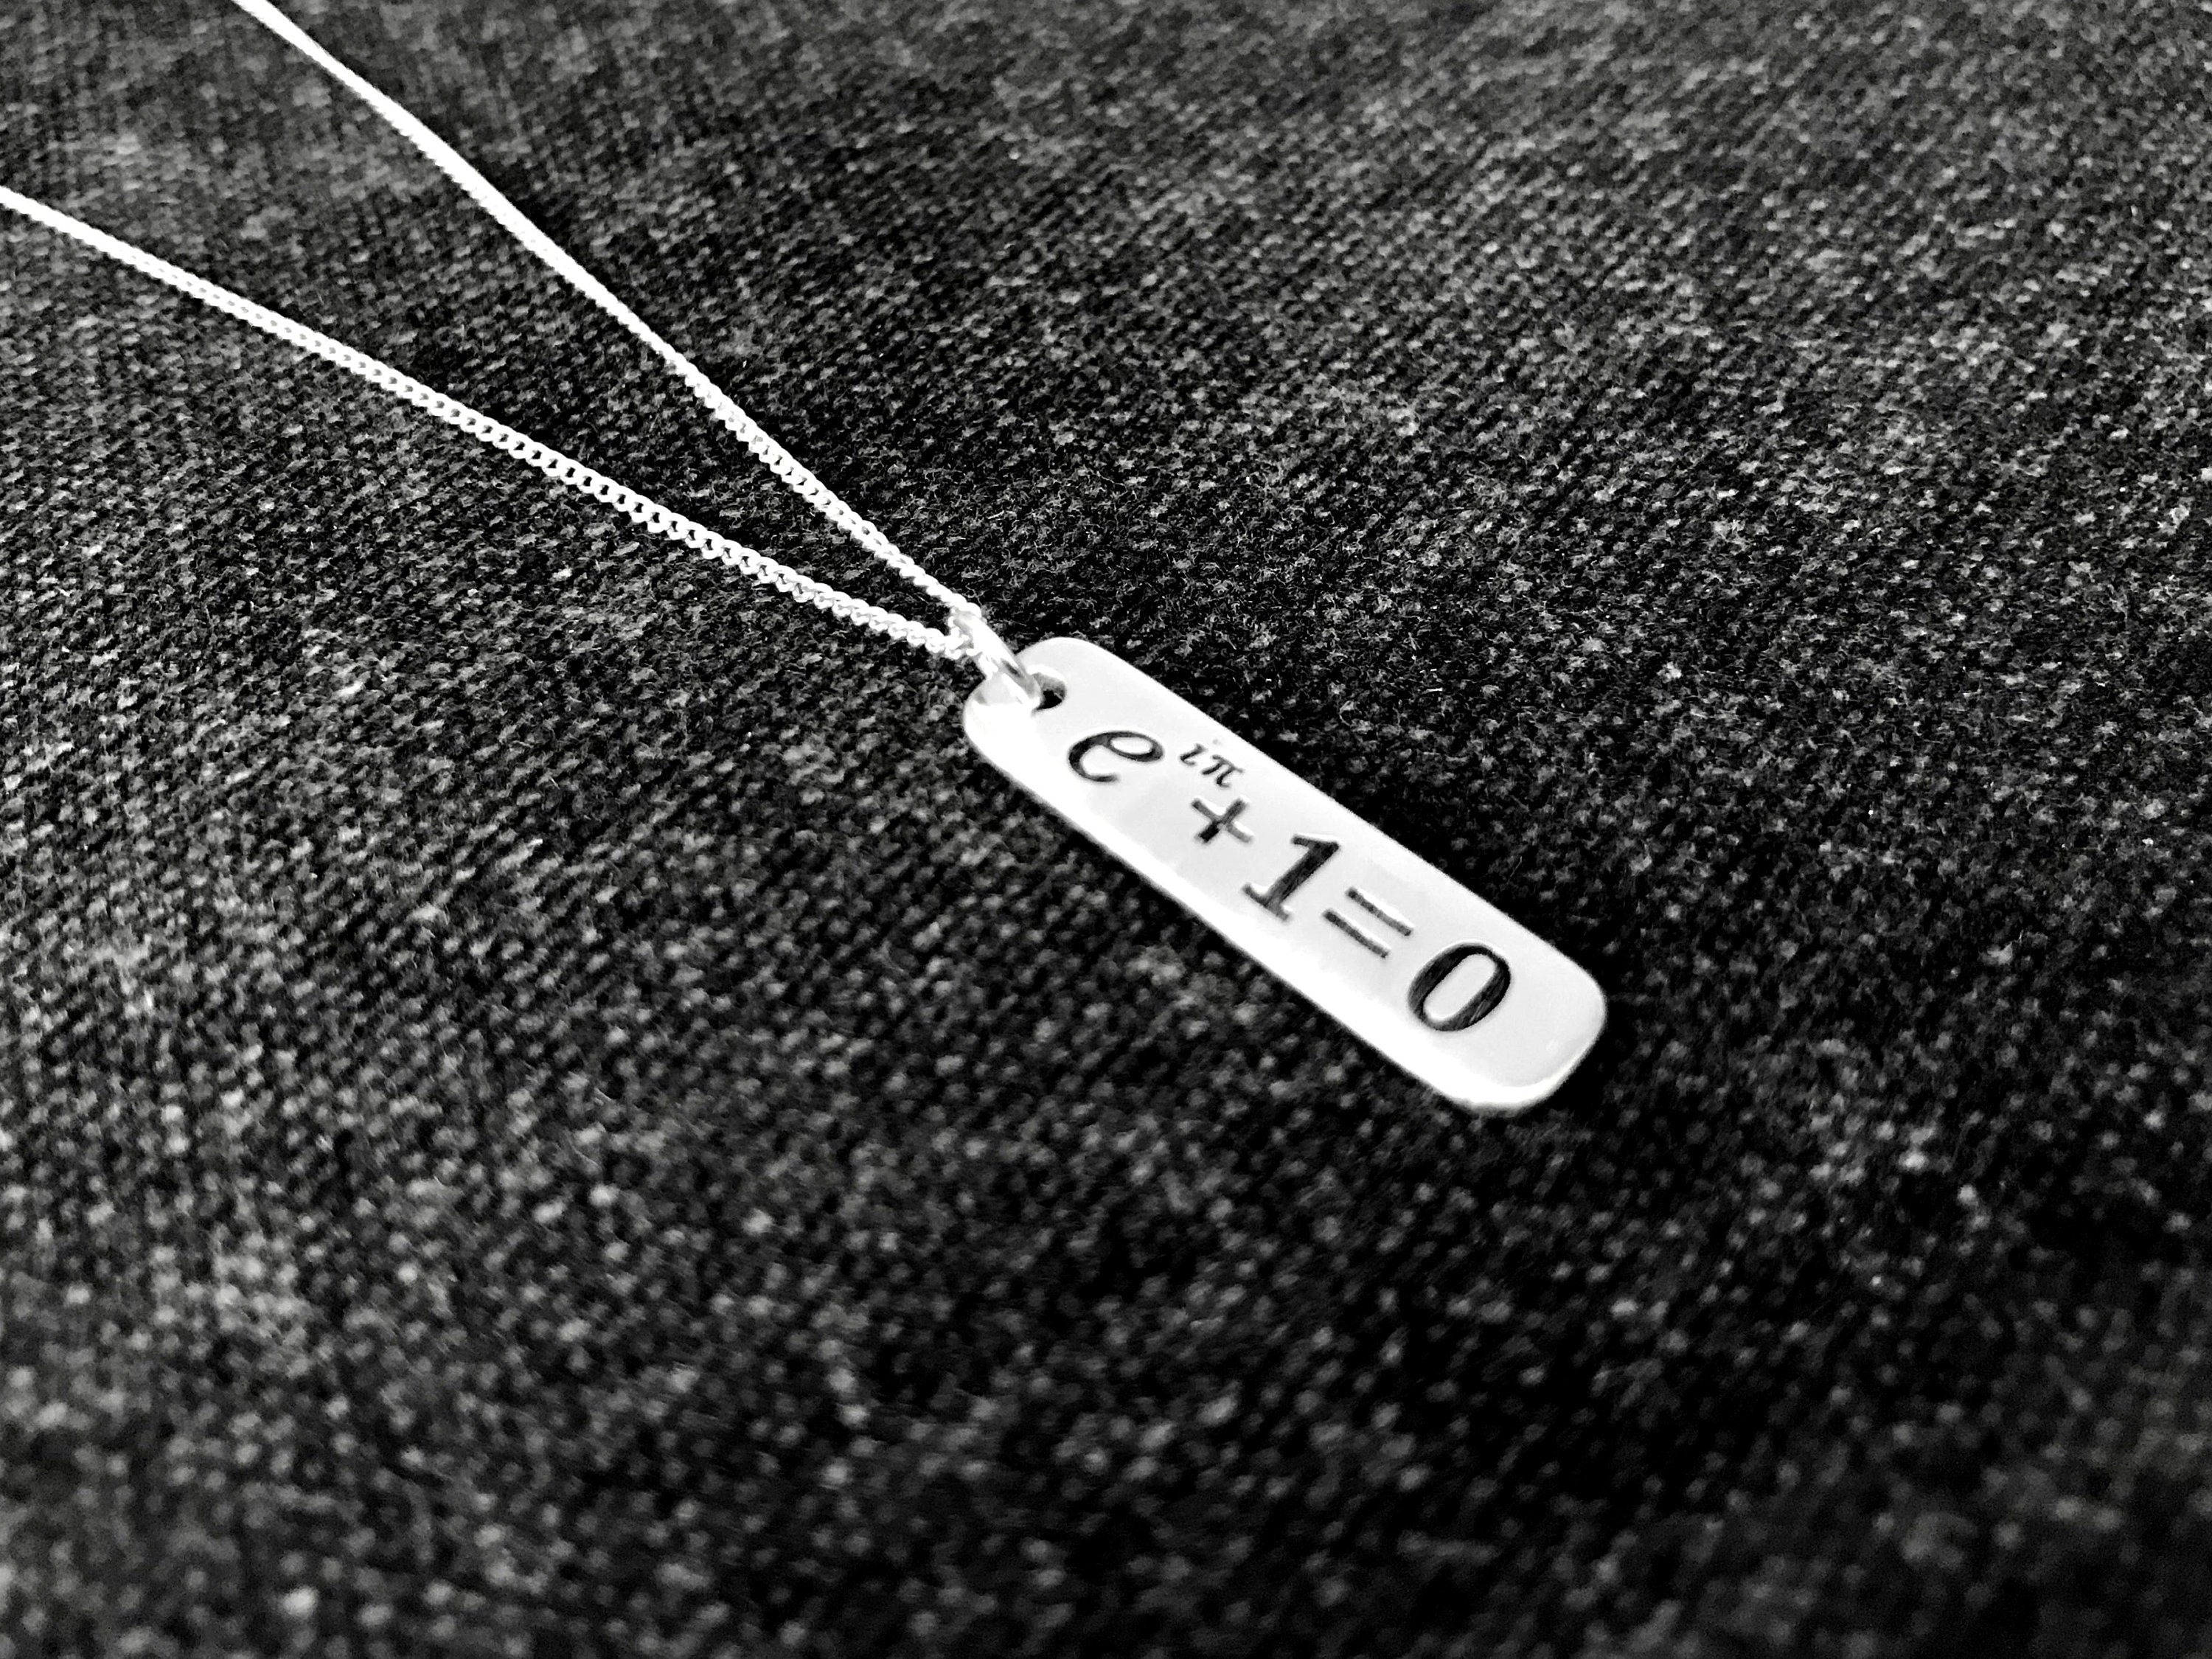 Handmade Sterling Silver Euler's Identity Necklace - Math & Physics Pendant Necklace - Men's / Women's STEM Jewelry